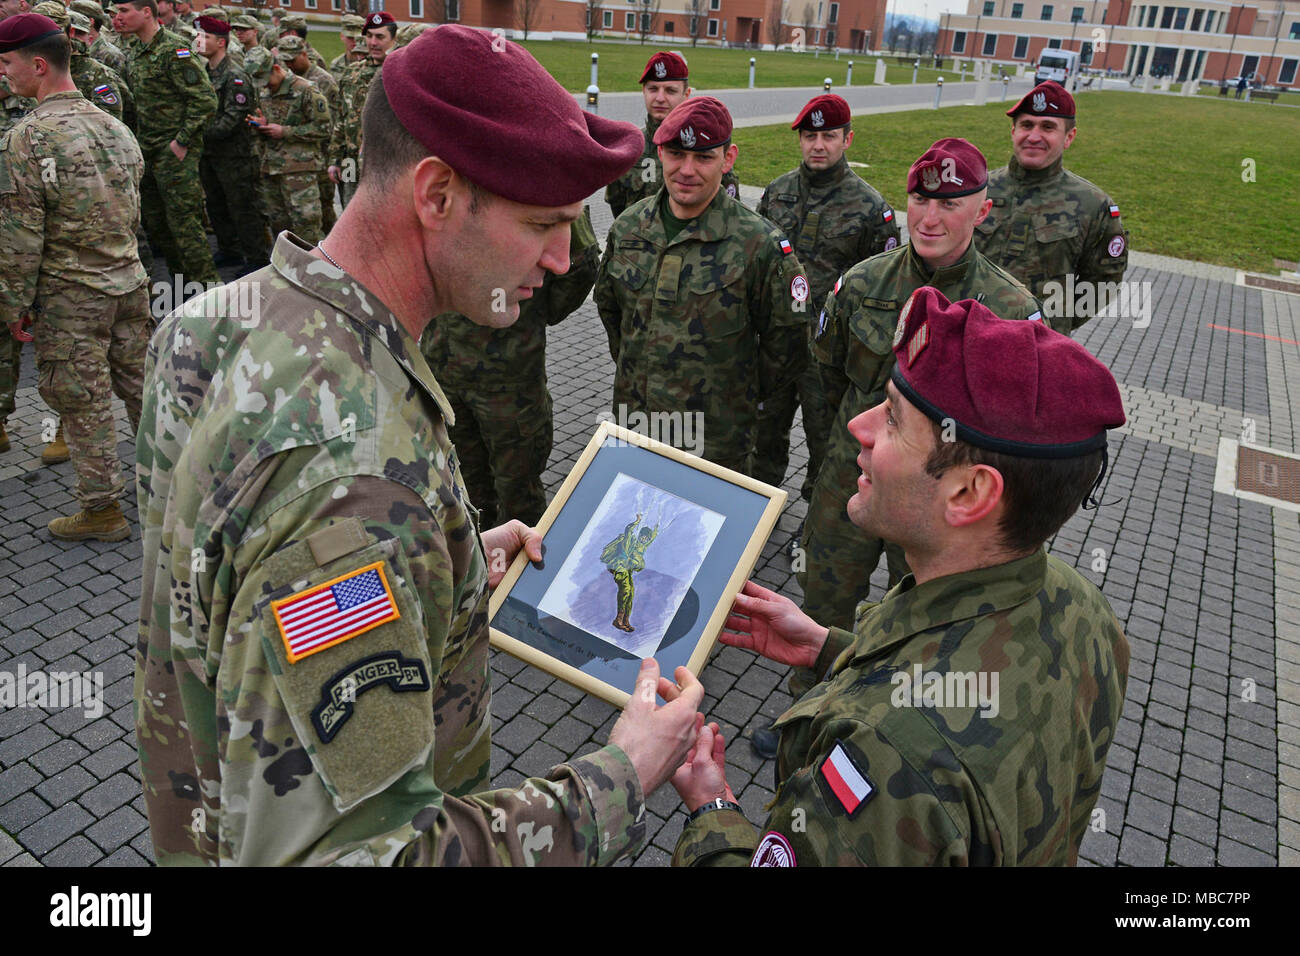 U.S. Army Col. James Bartholomees III, Commander of the 173rd Airborne Brigade, receives a gift from a Poland Army Soldier during the Expert Infantryman Badge (EIB) ceremony at Caserma Del Din, Vicenza, Italy, 15 Feb. 2018. (U.S. Army Stock Photo